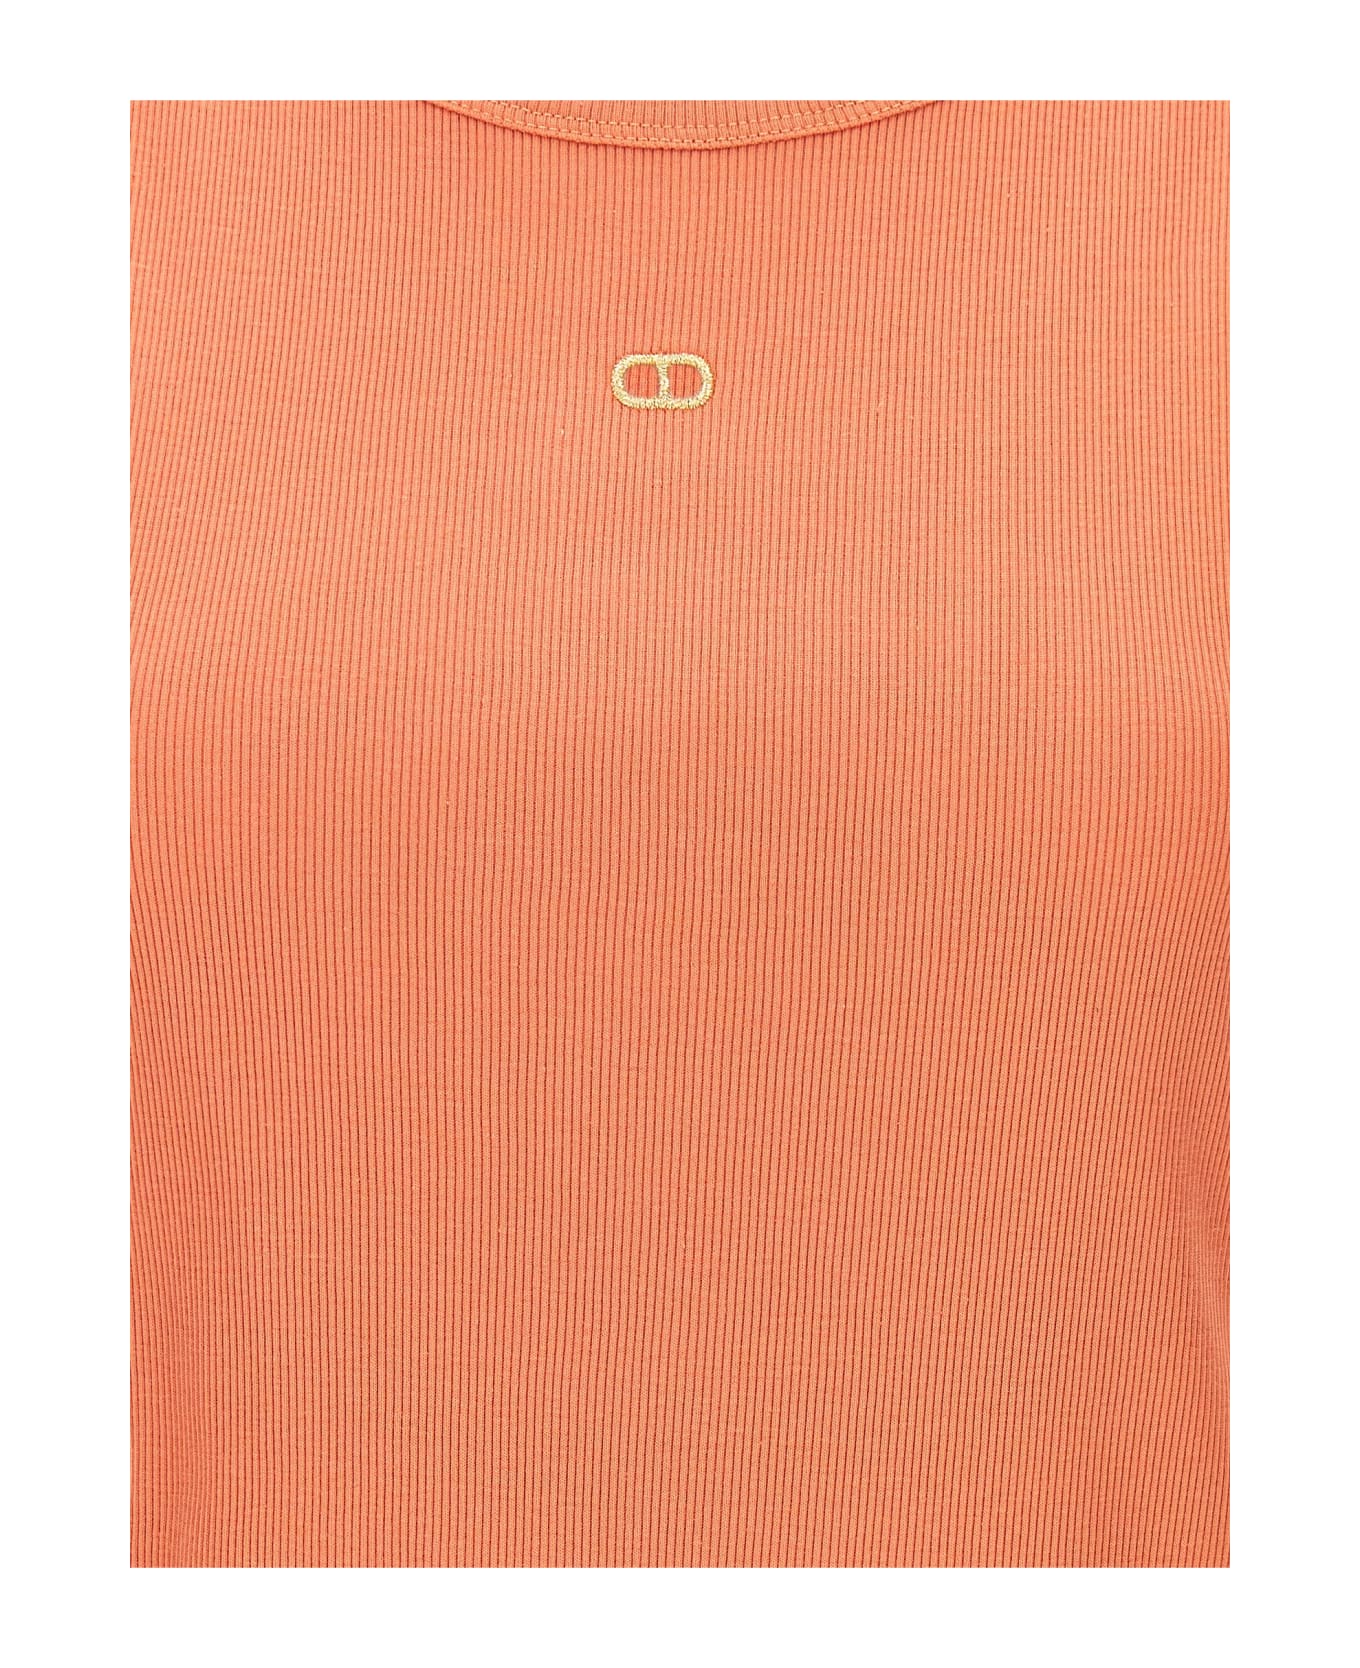 TwinSet Logo Embroidery Tank Top - Sunset